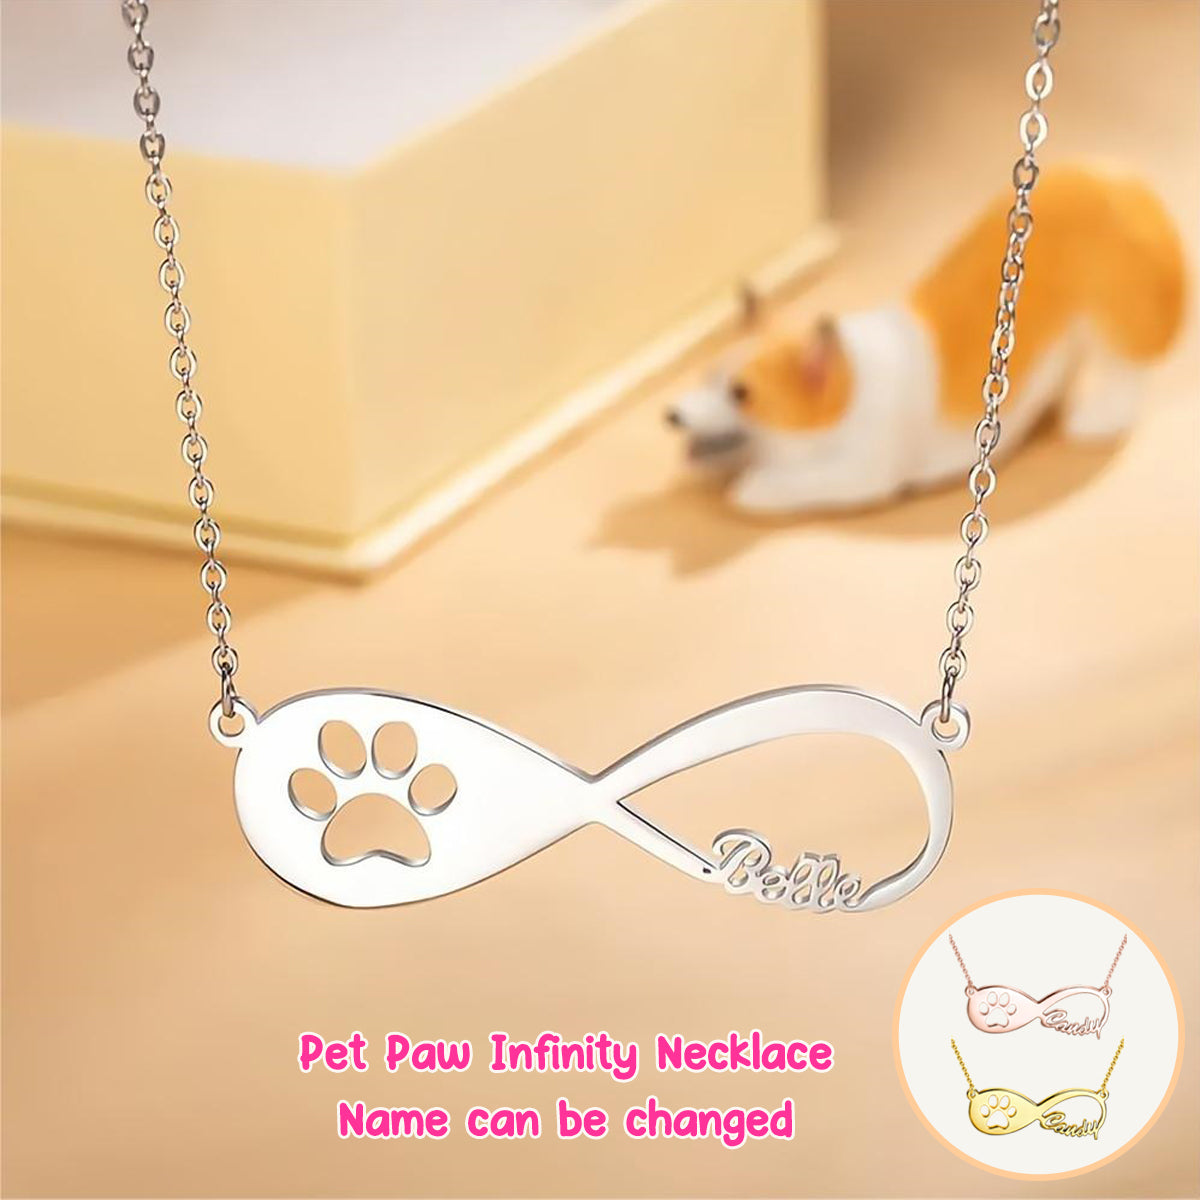 Personalized Cute Pet Paw Infinity Necklace